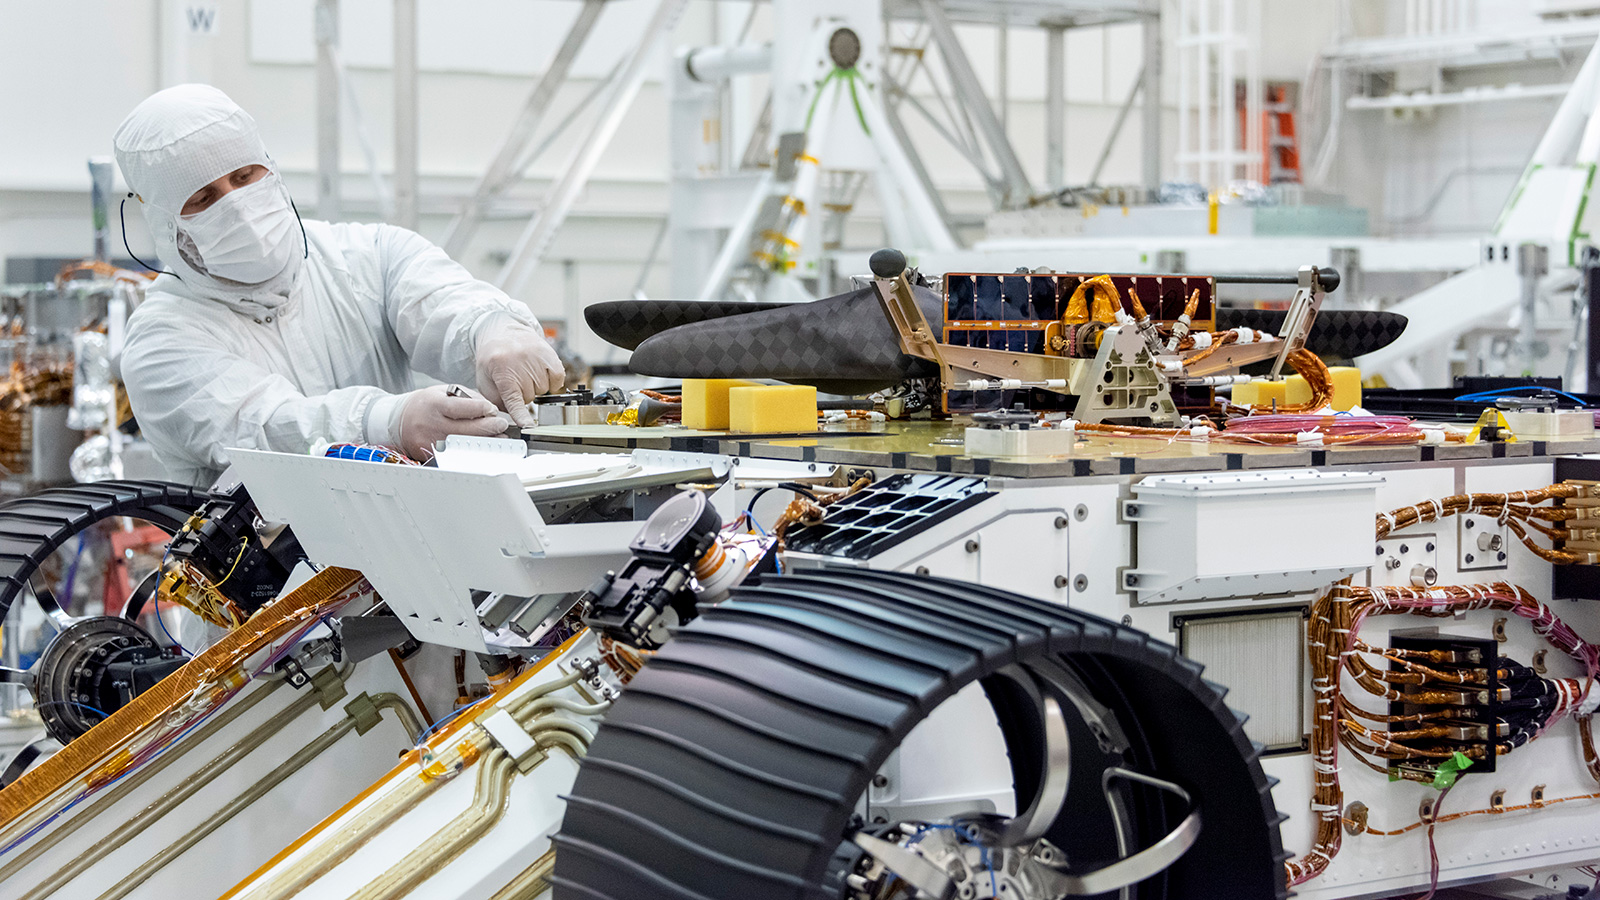 An engineer works on attaching NASA's Mars Helicopter to the belly of the Mars 2020 rover